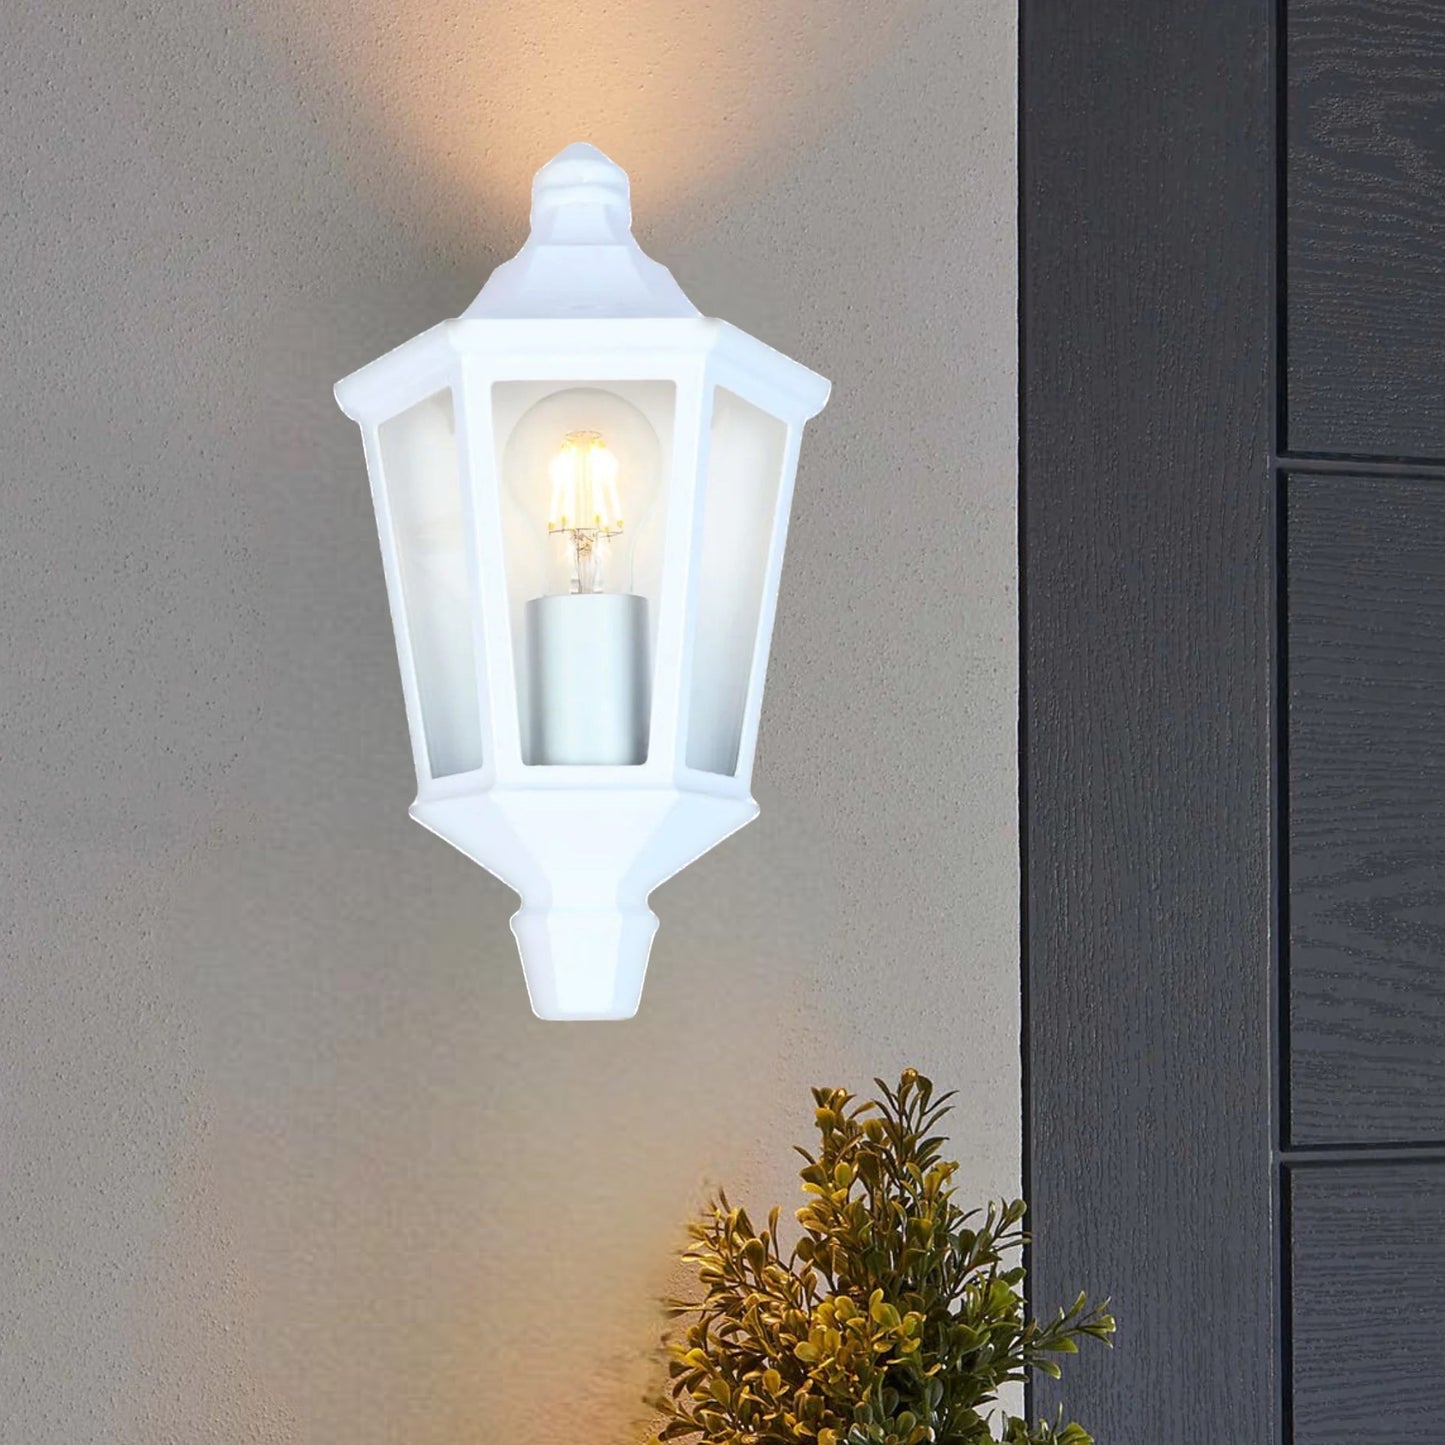 If you’re looking for a modern take on a traditional outdoor wall light, this glass half lantern flush wall light is perfect for adding style and protection for your home.   This product also contains an stylish white matt finish, making it ideal for any home design - adding a statement to any wall it fits in. Create an inviting glow over your garden and home with our Tyra glass coach lantern wall light by CGC Interiors.